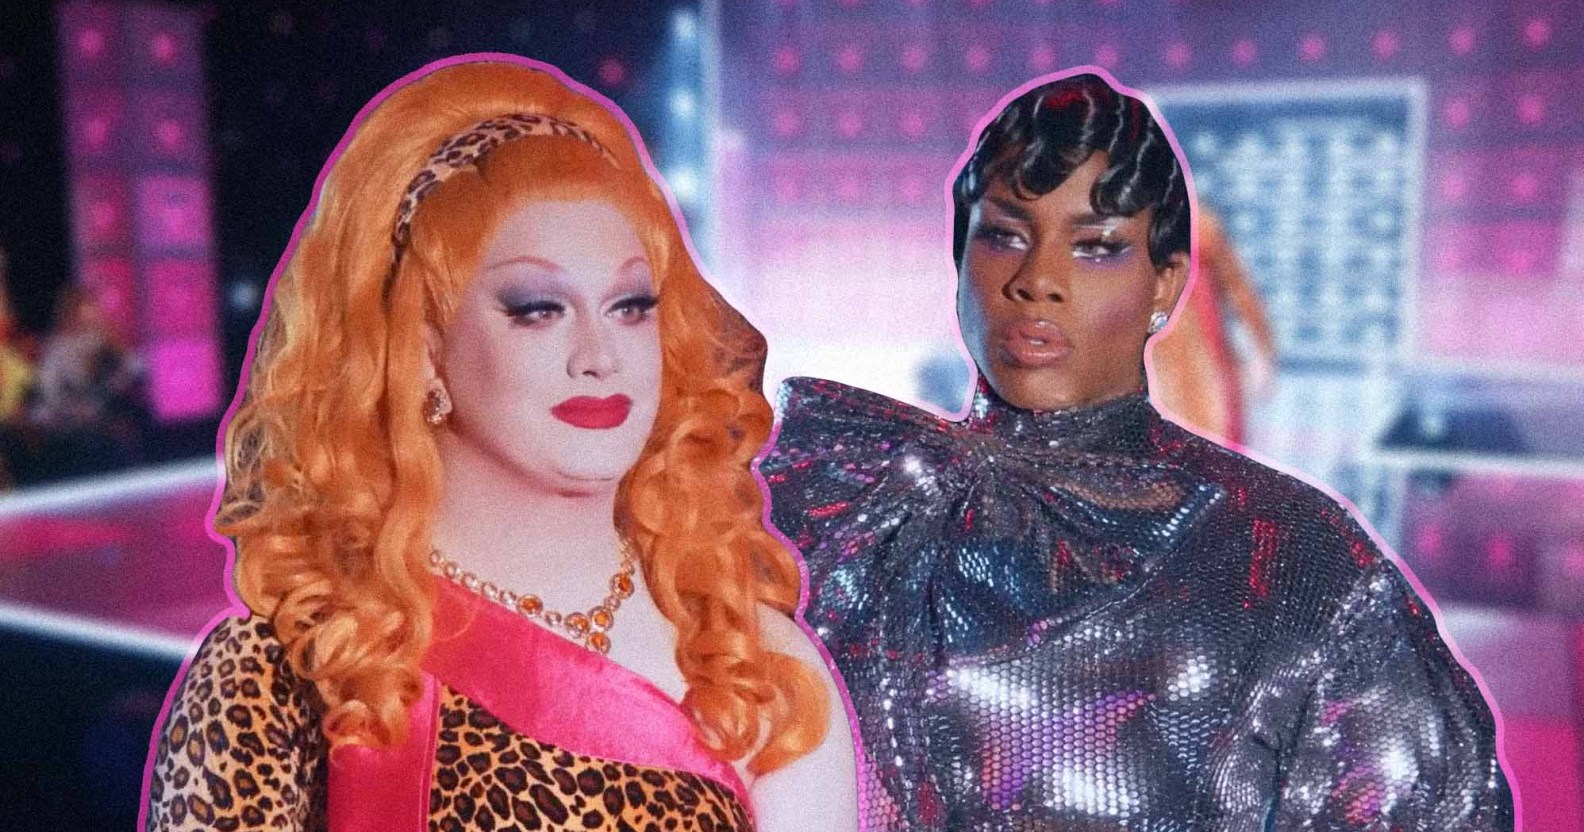 A graphic showing cut-out images of drag queen Jinkx Monsoon on the left wearing a orange wig and leopard print dress over a pink top with the right side of the picture showing an image of drag queen Monét X Change wearing a shiny silver outfit